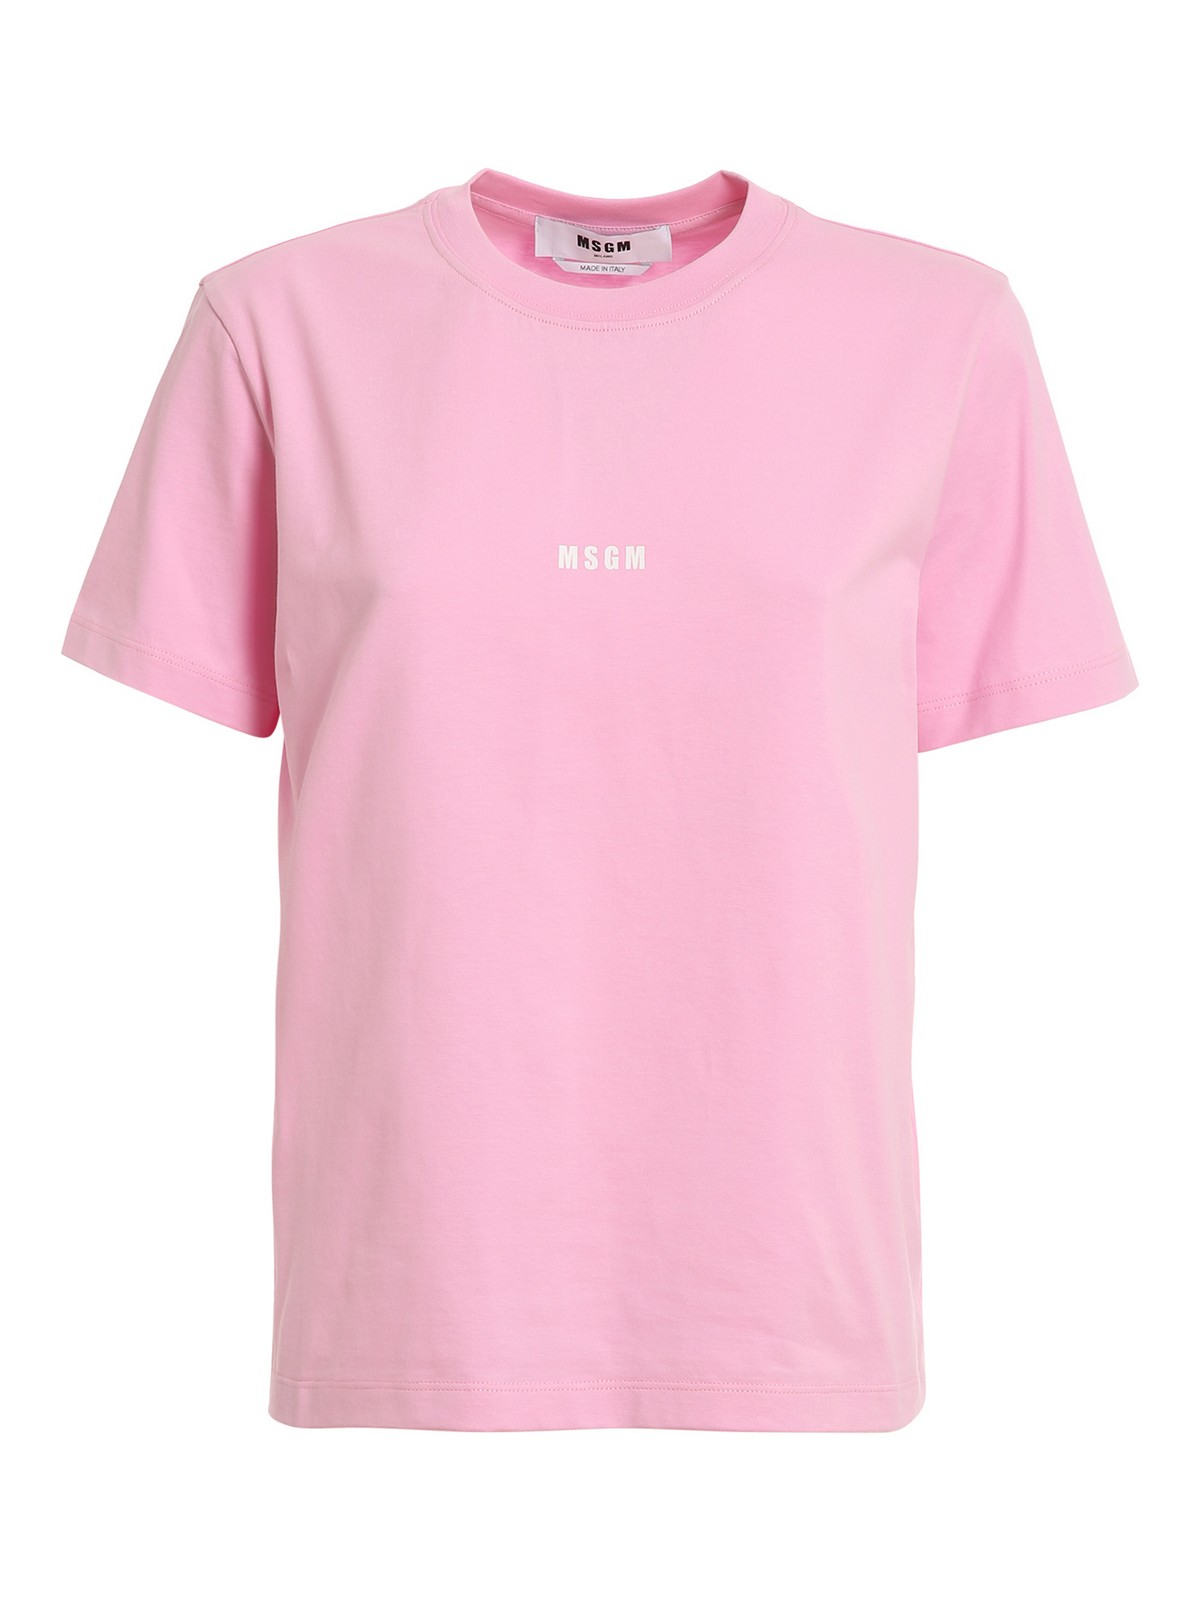 Msgm Small Logo T-shirt In Pink